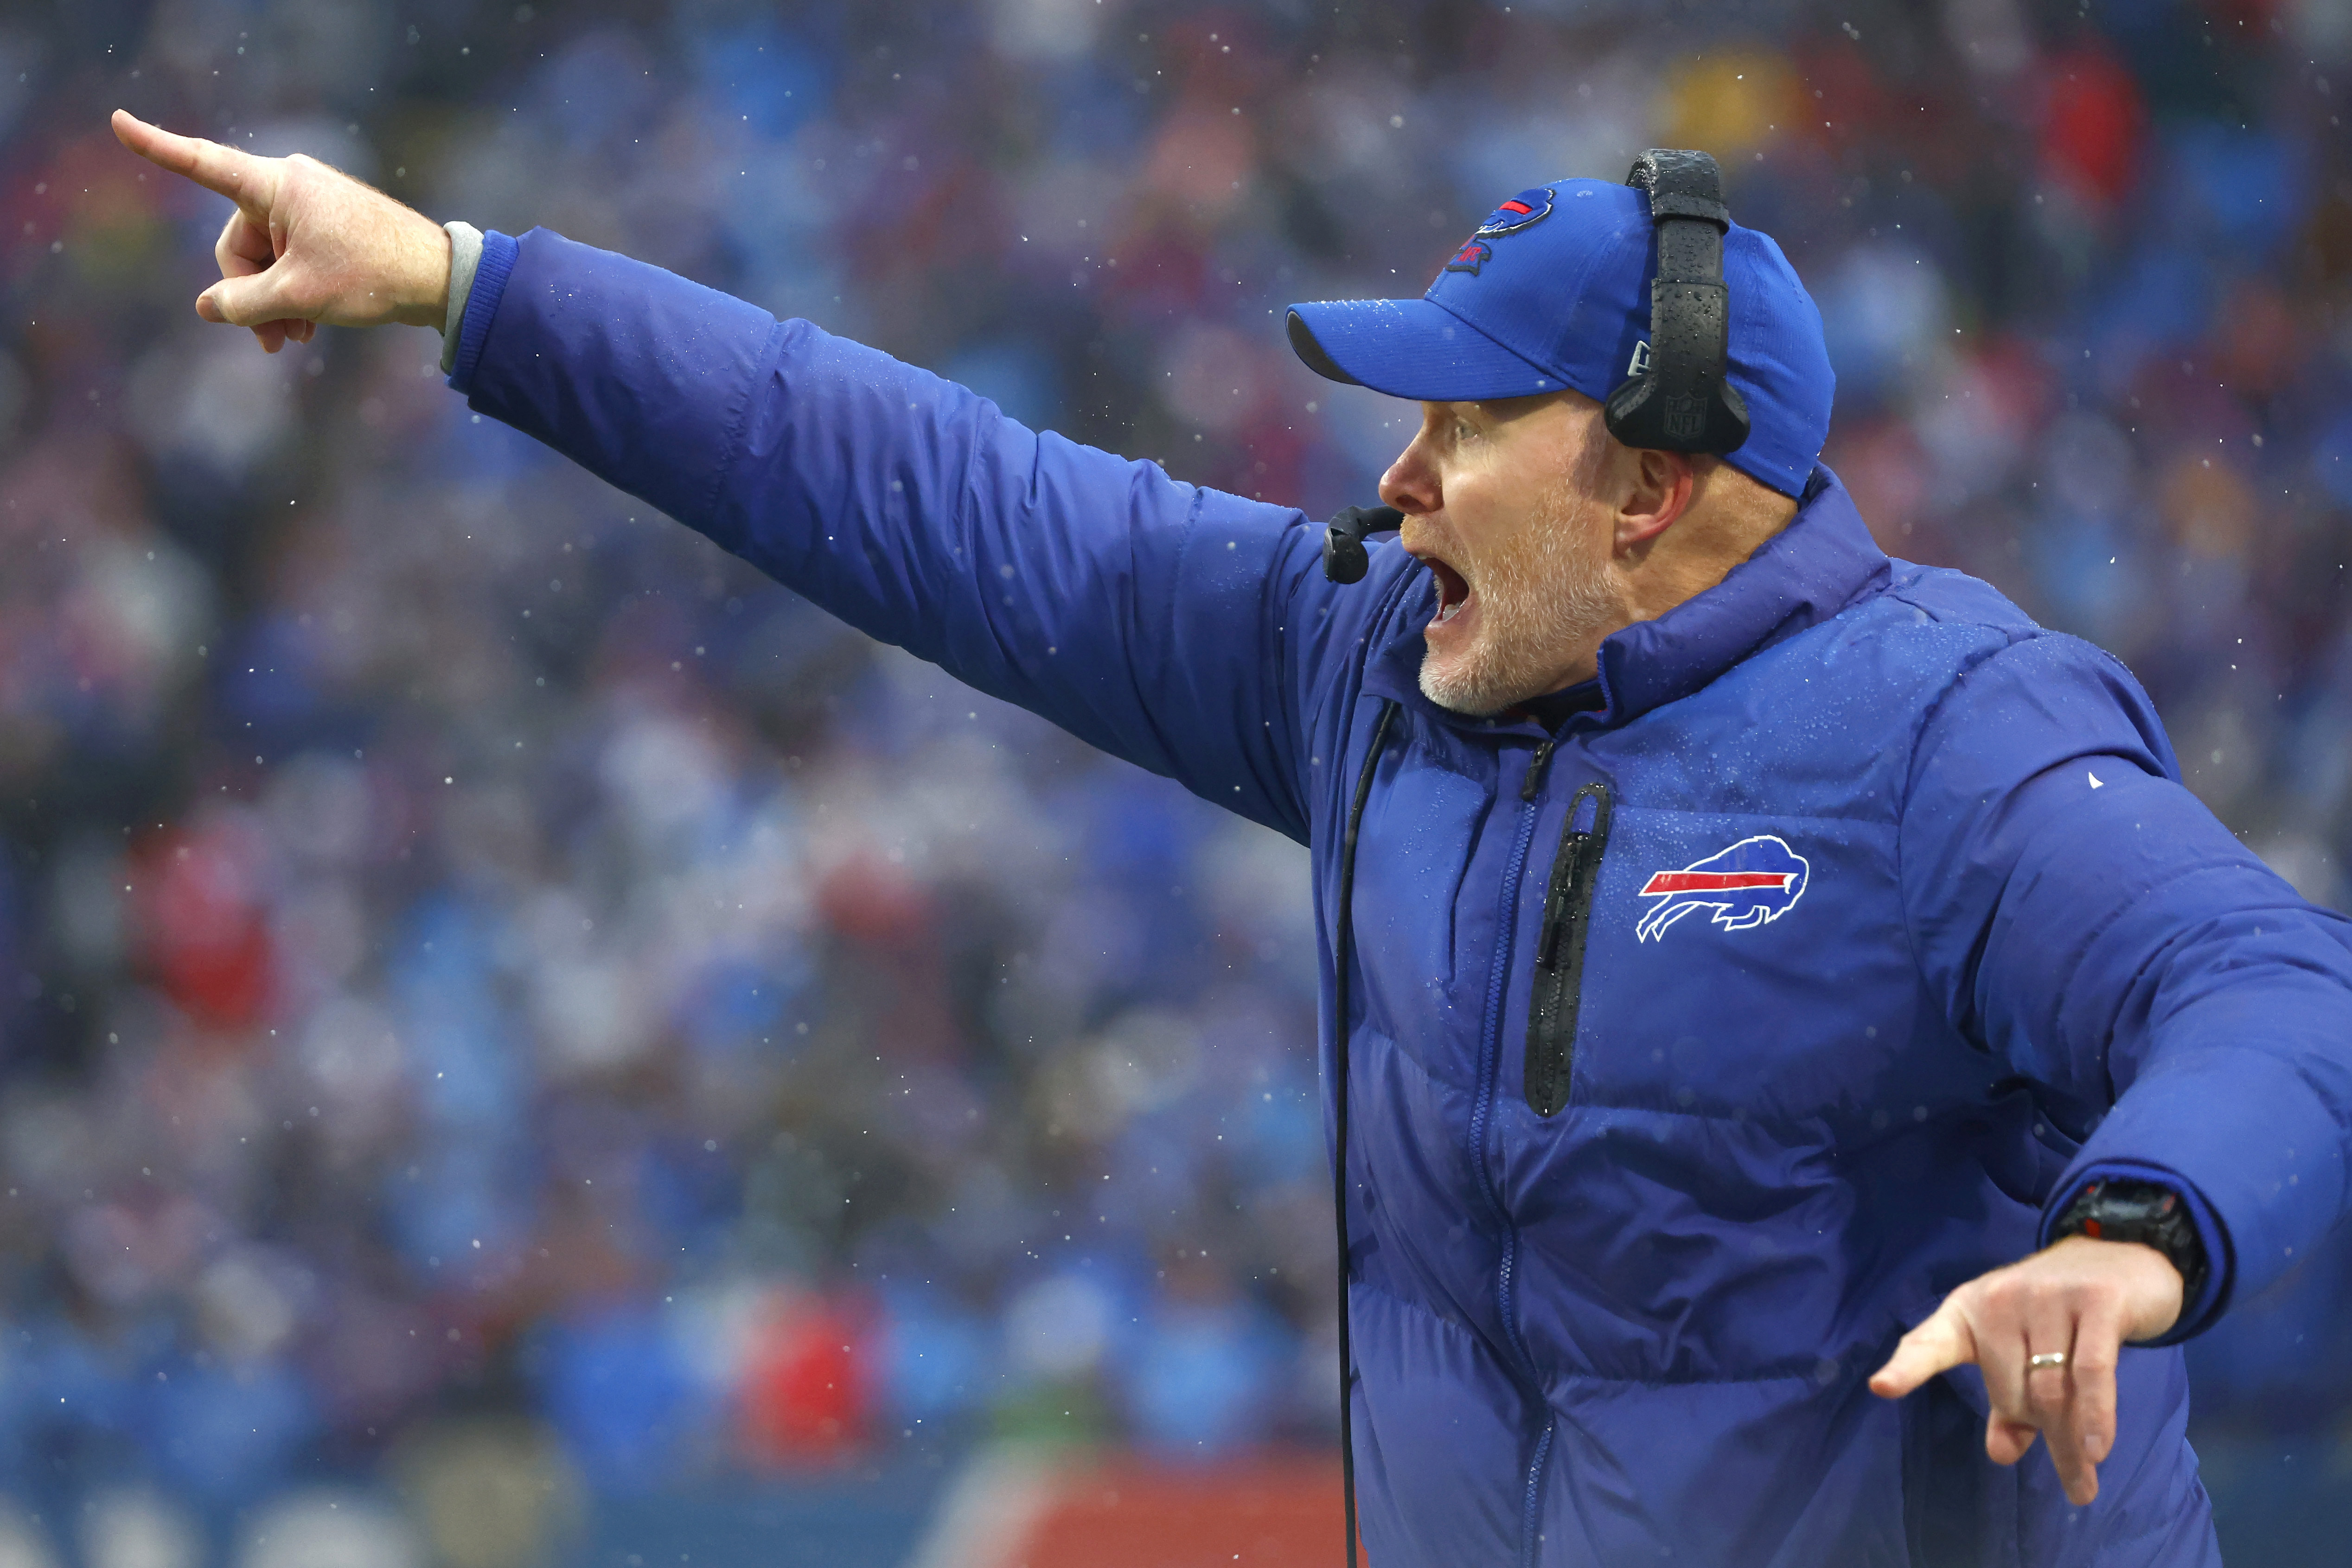 AFC-leading Bills overcome elements, beat White, Jets 20-12 - The San Diego  Union-Tribune